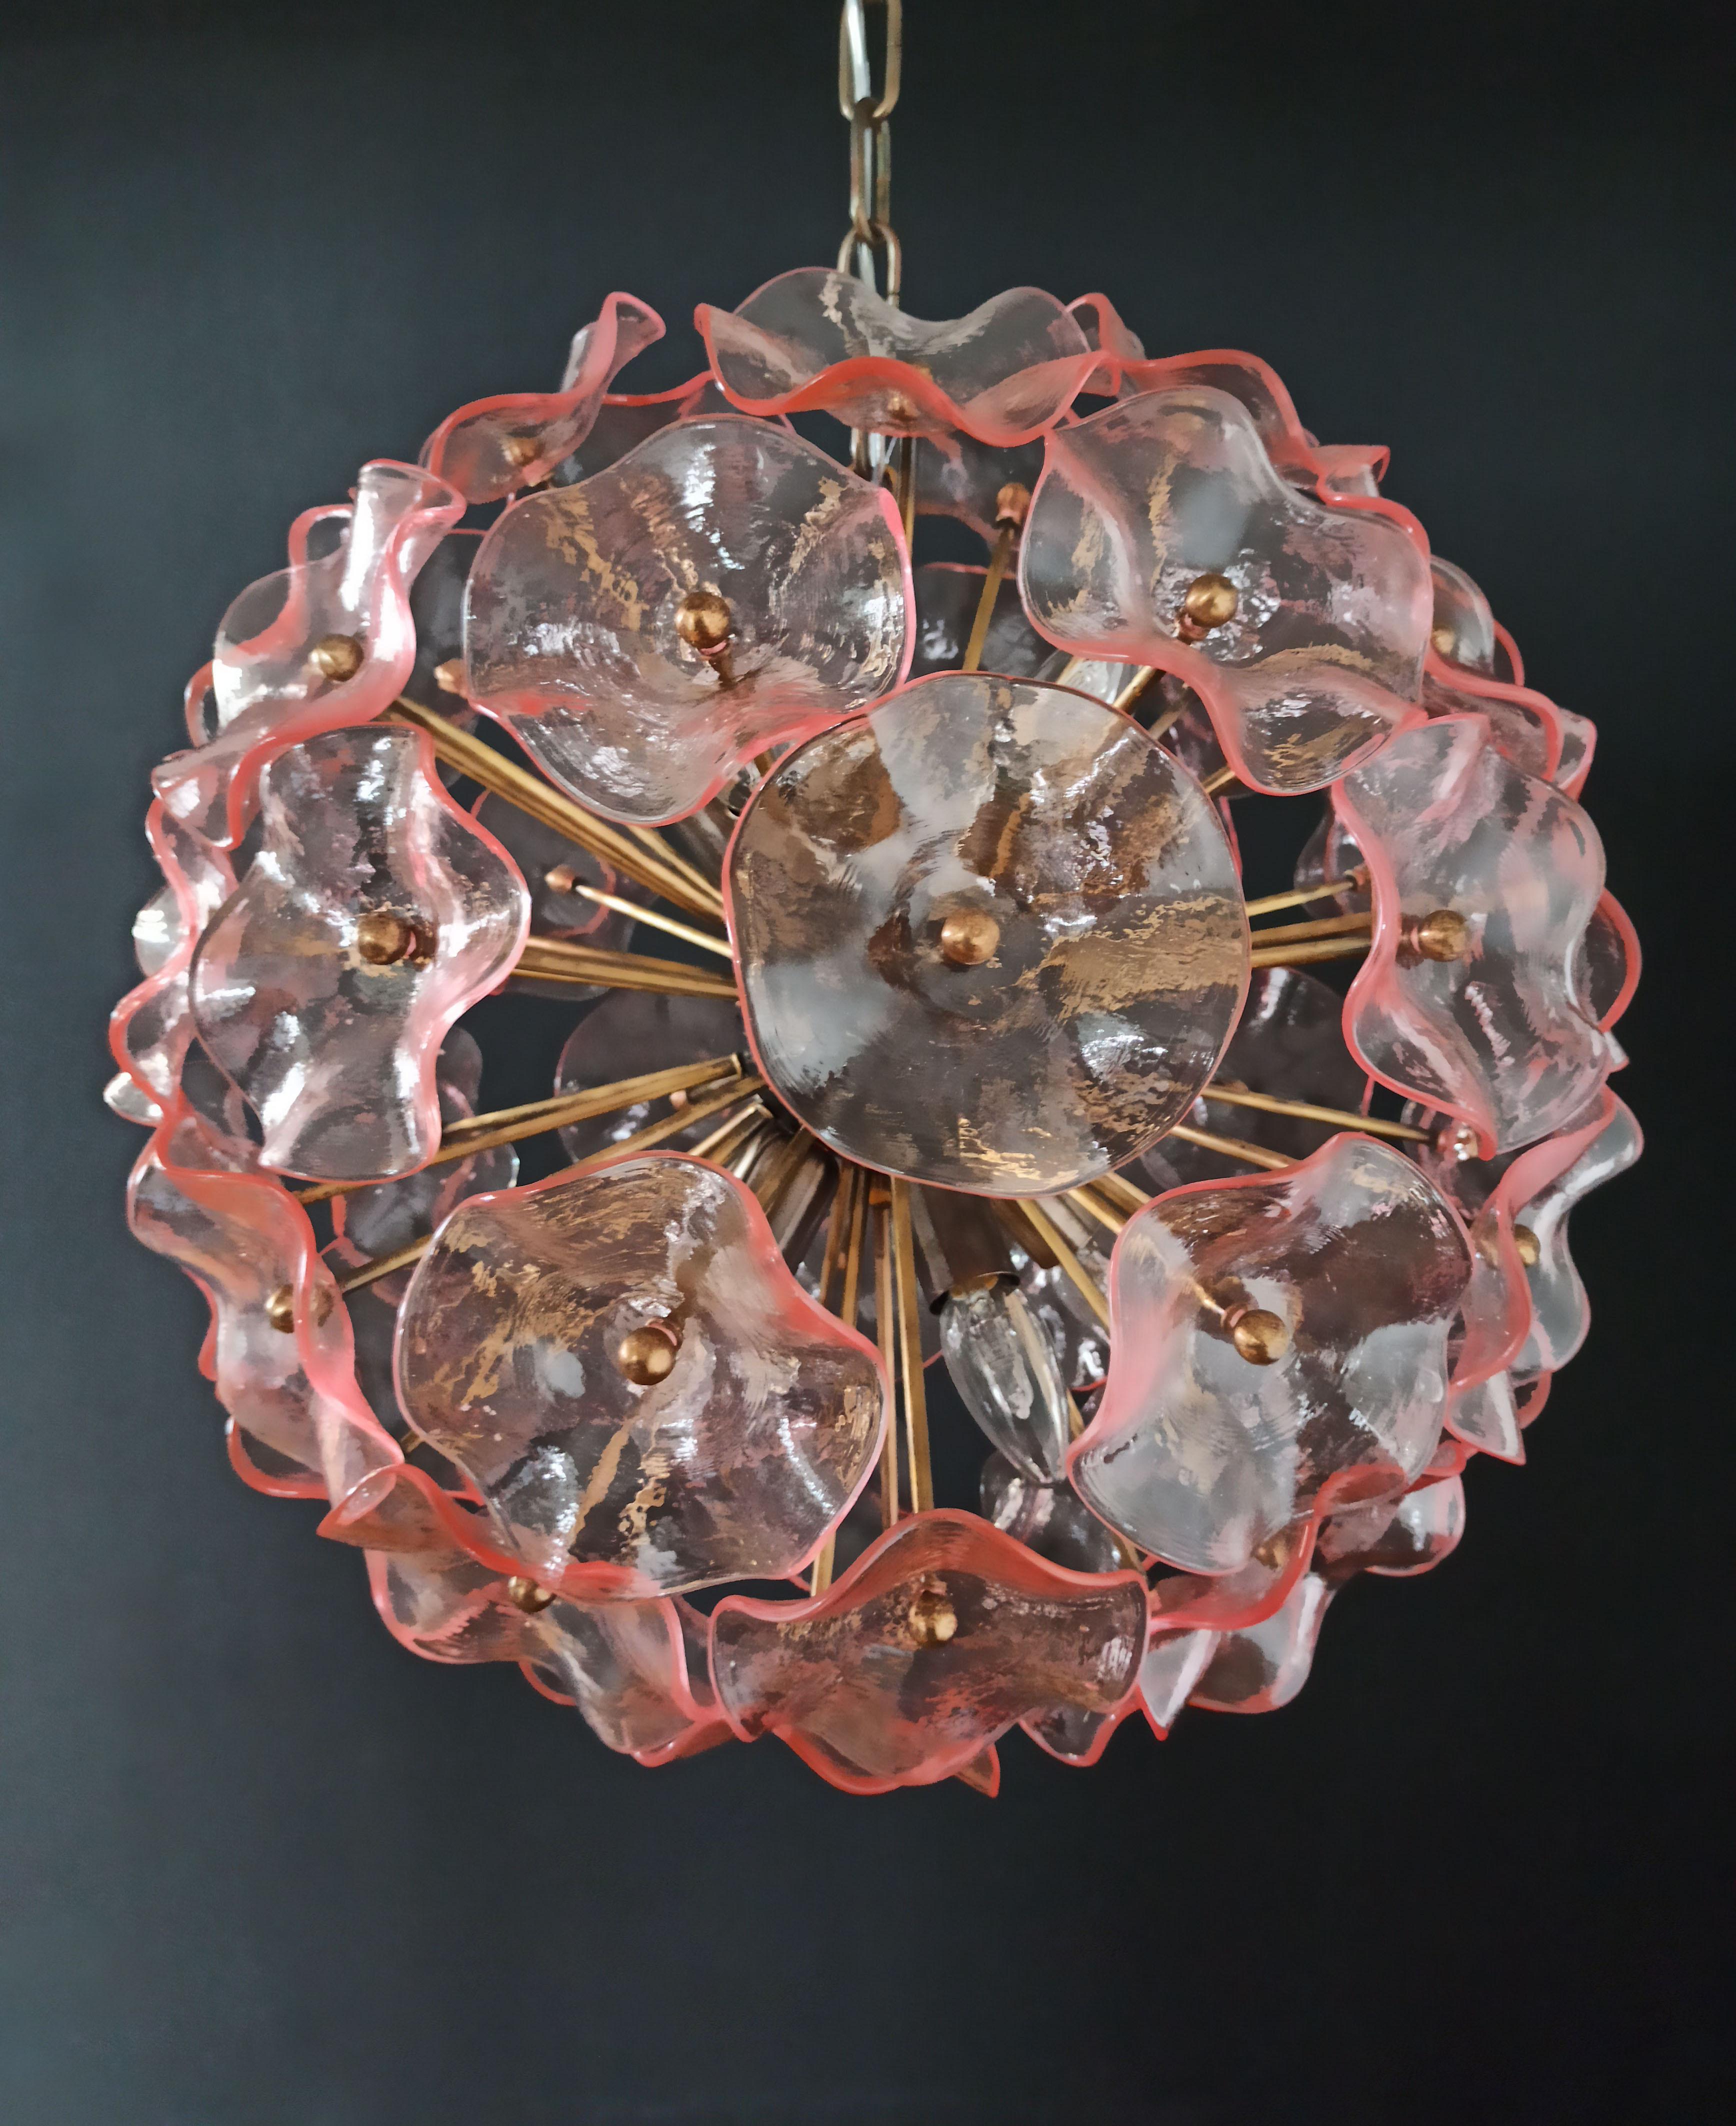 Sputnik space age Italian vintage crystal chandelier made by 51 pink crystals in a burnished brass metal frame.
Period: 1970s-1980s
Dimensions: 41.30 inches (105 cm) height with chain, 17.70 inches (45 cm) height without chain, 19.70 inches (50